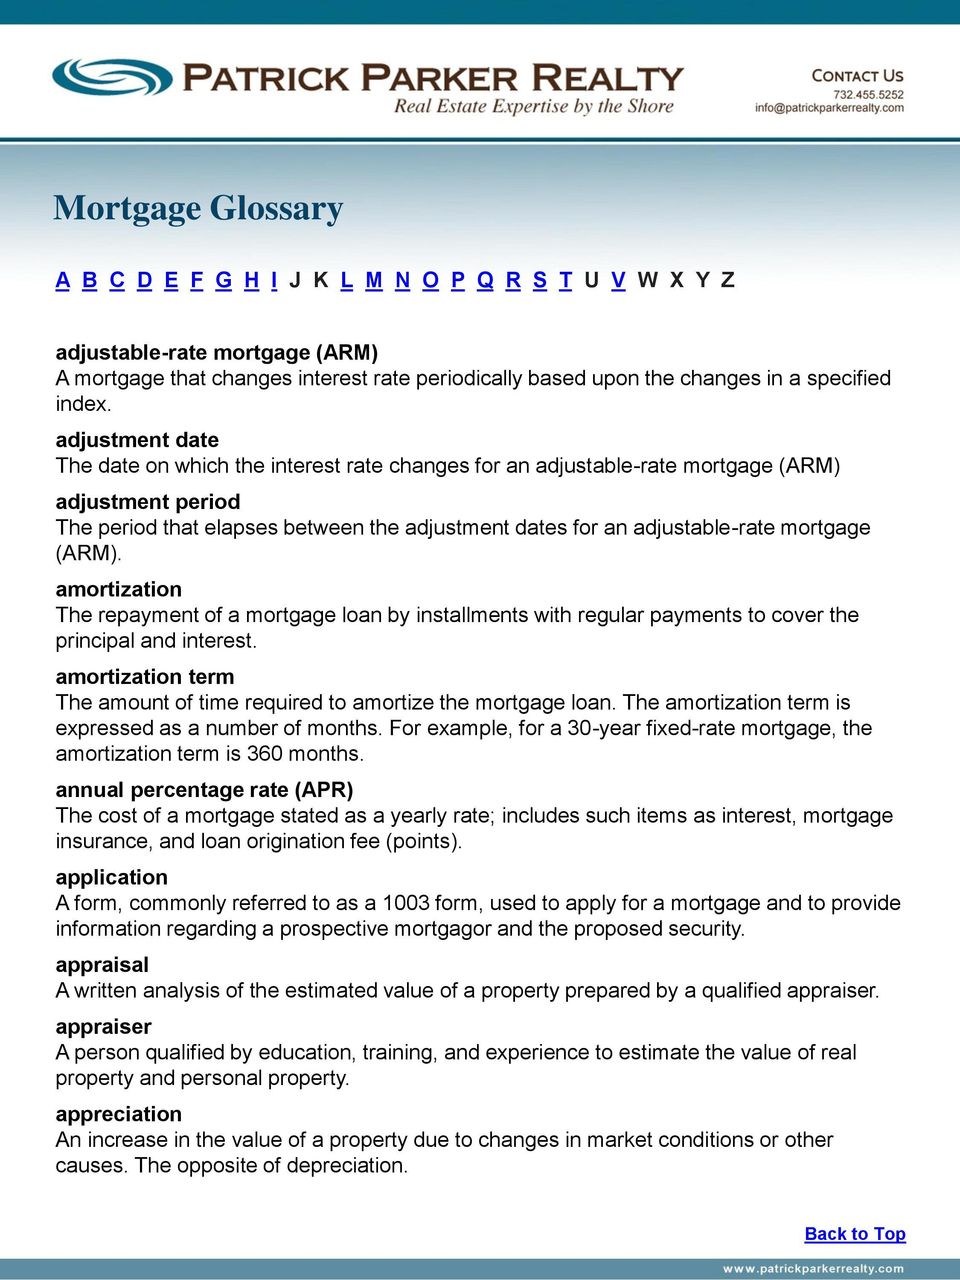 mortgage (ARM). amortization The repayment of a mortgage loan by installments with regular payments to cover the principal and interest.